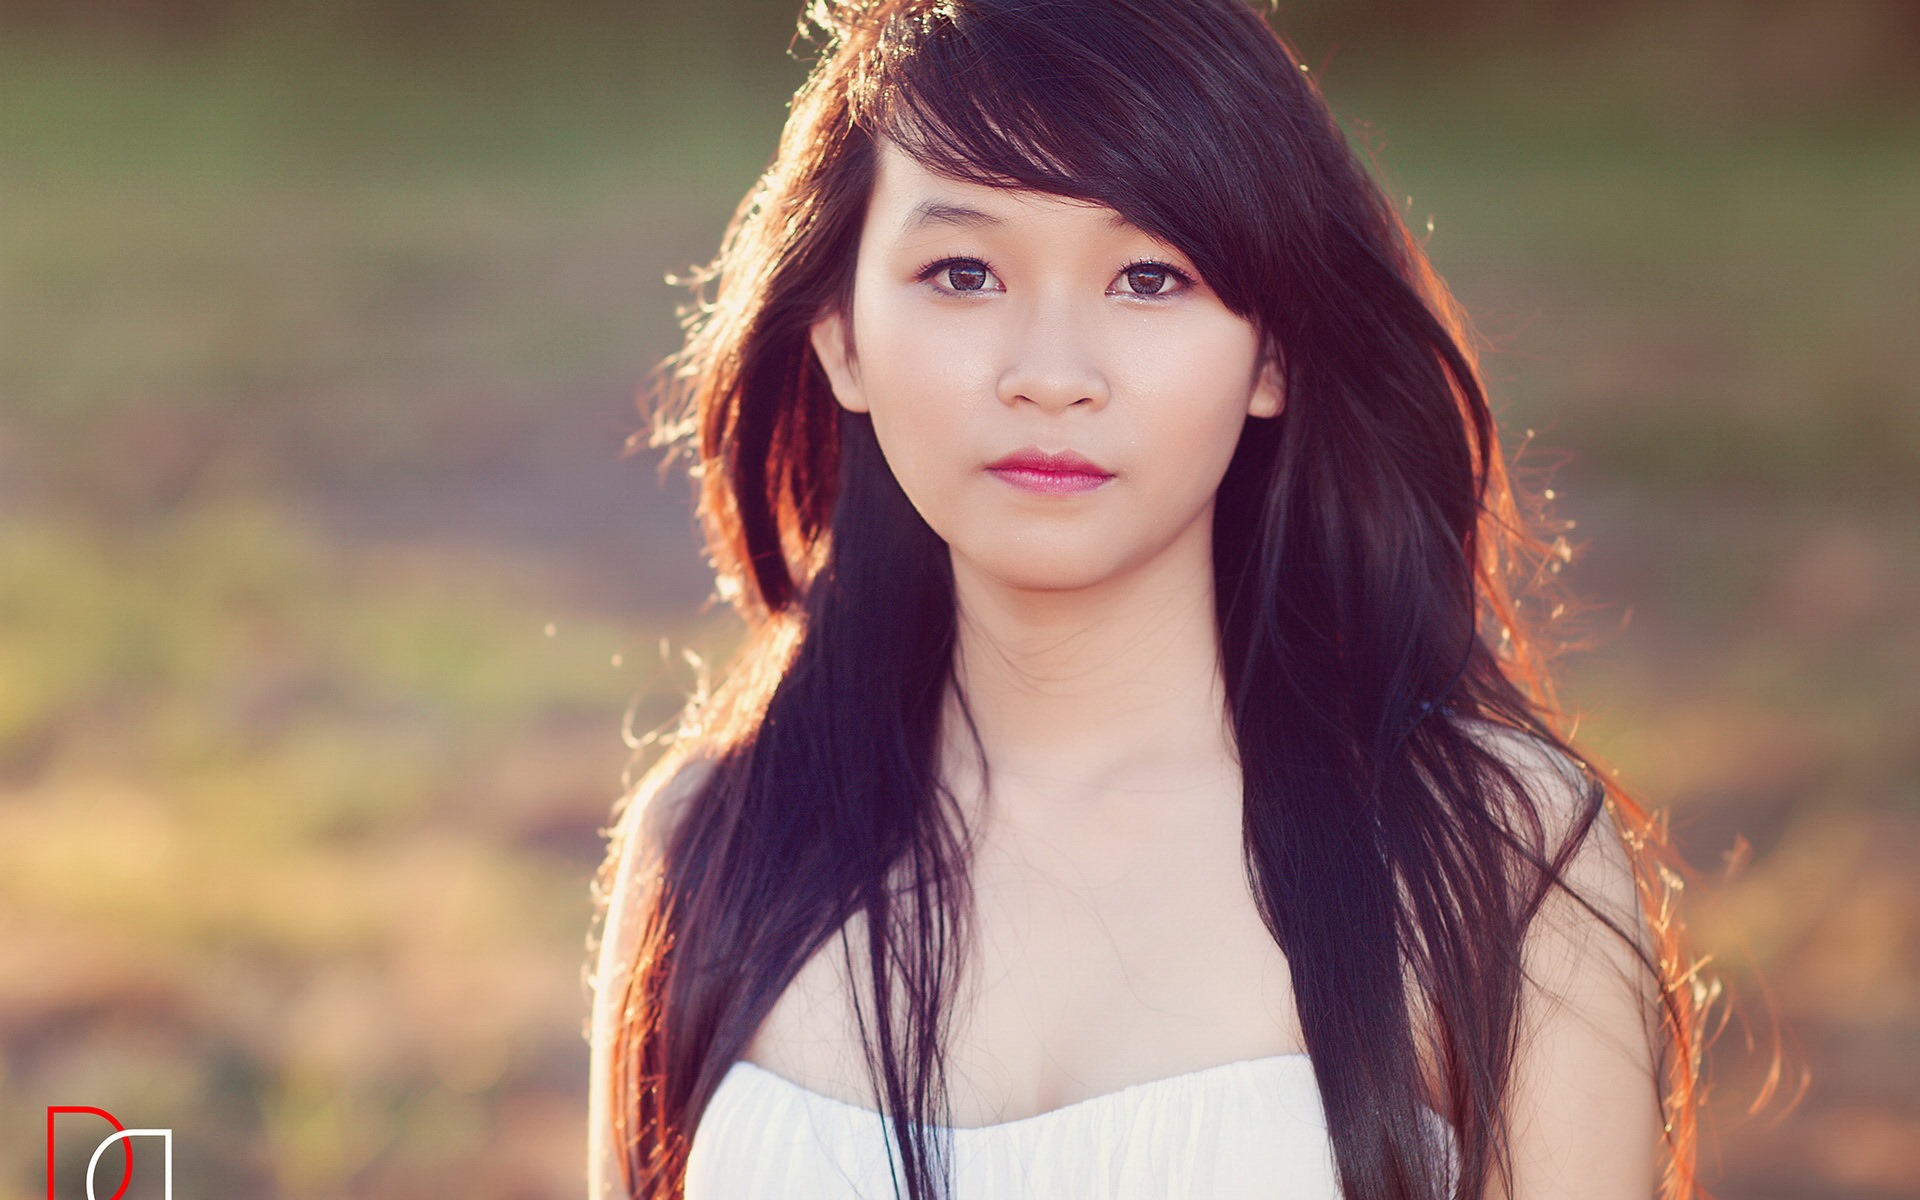 Pure and lovely young Asian girl HD wallpapers collection (4) #25 - 1920x1200